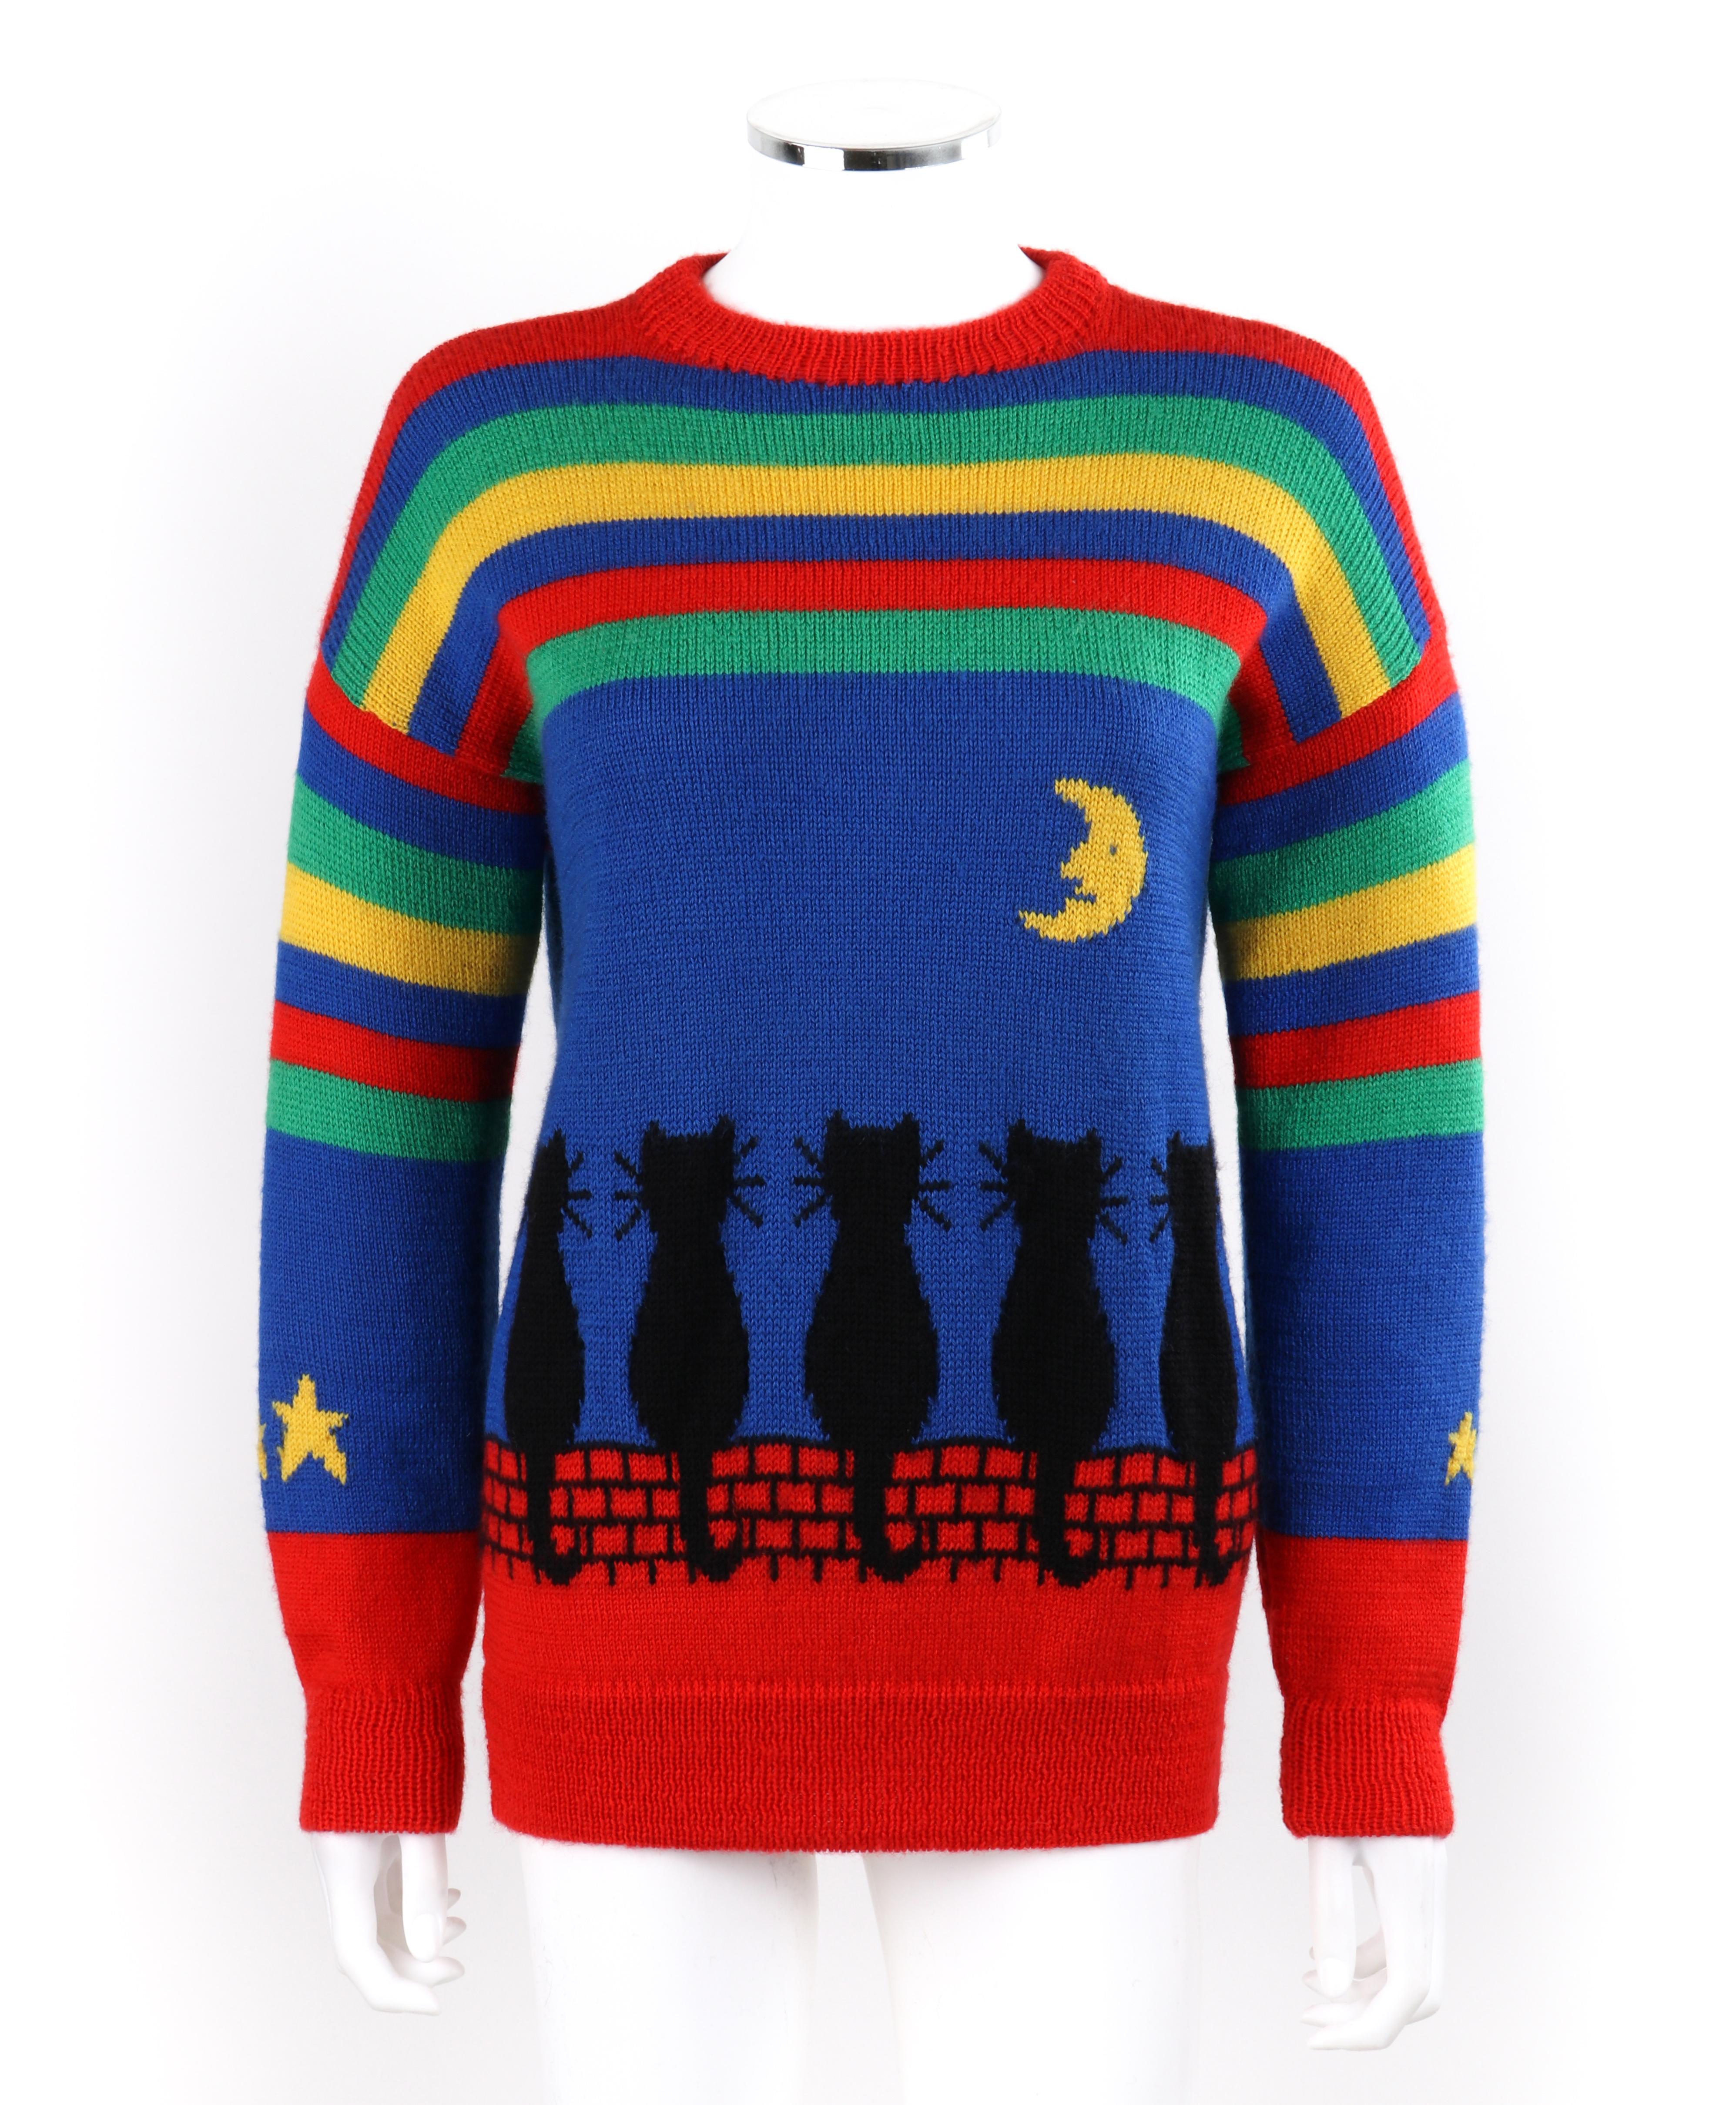 SALLY'S OWN c.1980’s Multicolor Striped Black Cat Knit Pullover Crewneck Sweater
 
Circa: 1980’s
Label(s): “Sally’s Own”; Woolmark tag
Style: Pullover sweater
Color(s): Shades of blue, red, yellow, green, and black
Lined: No
Marked Fabric Content: